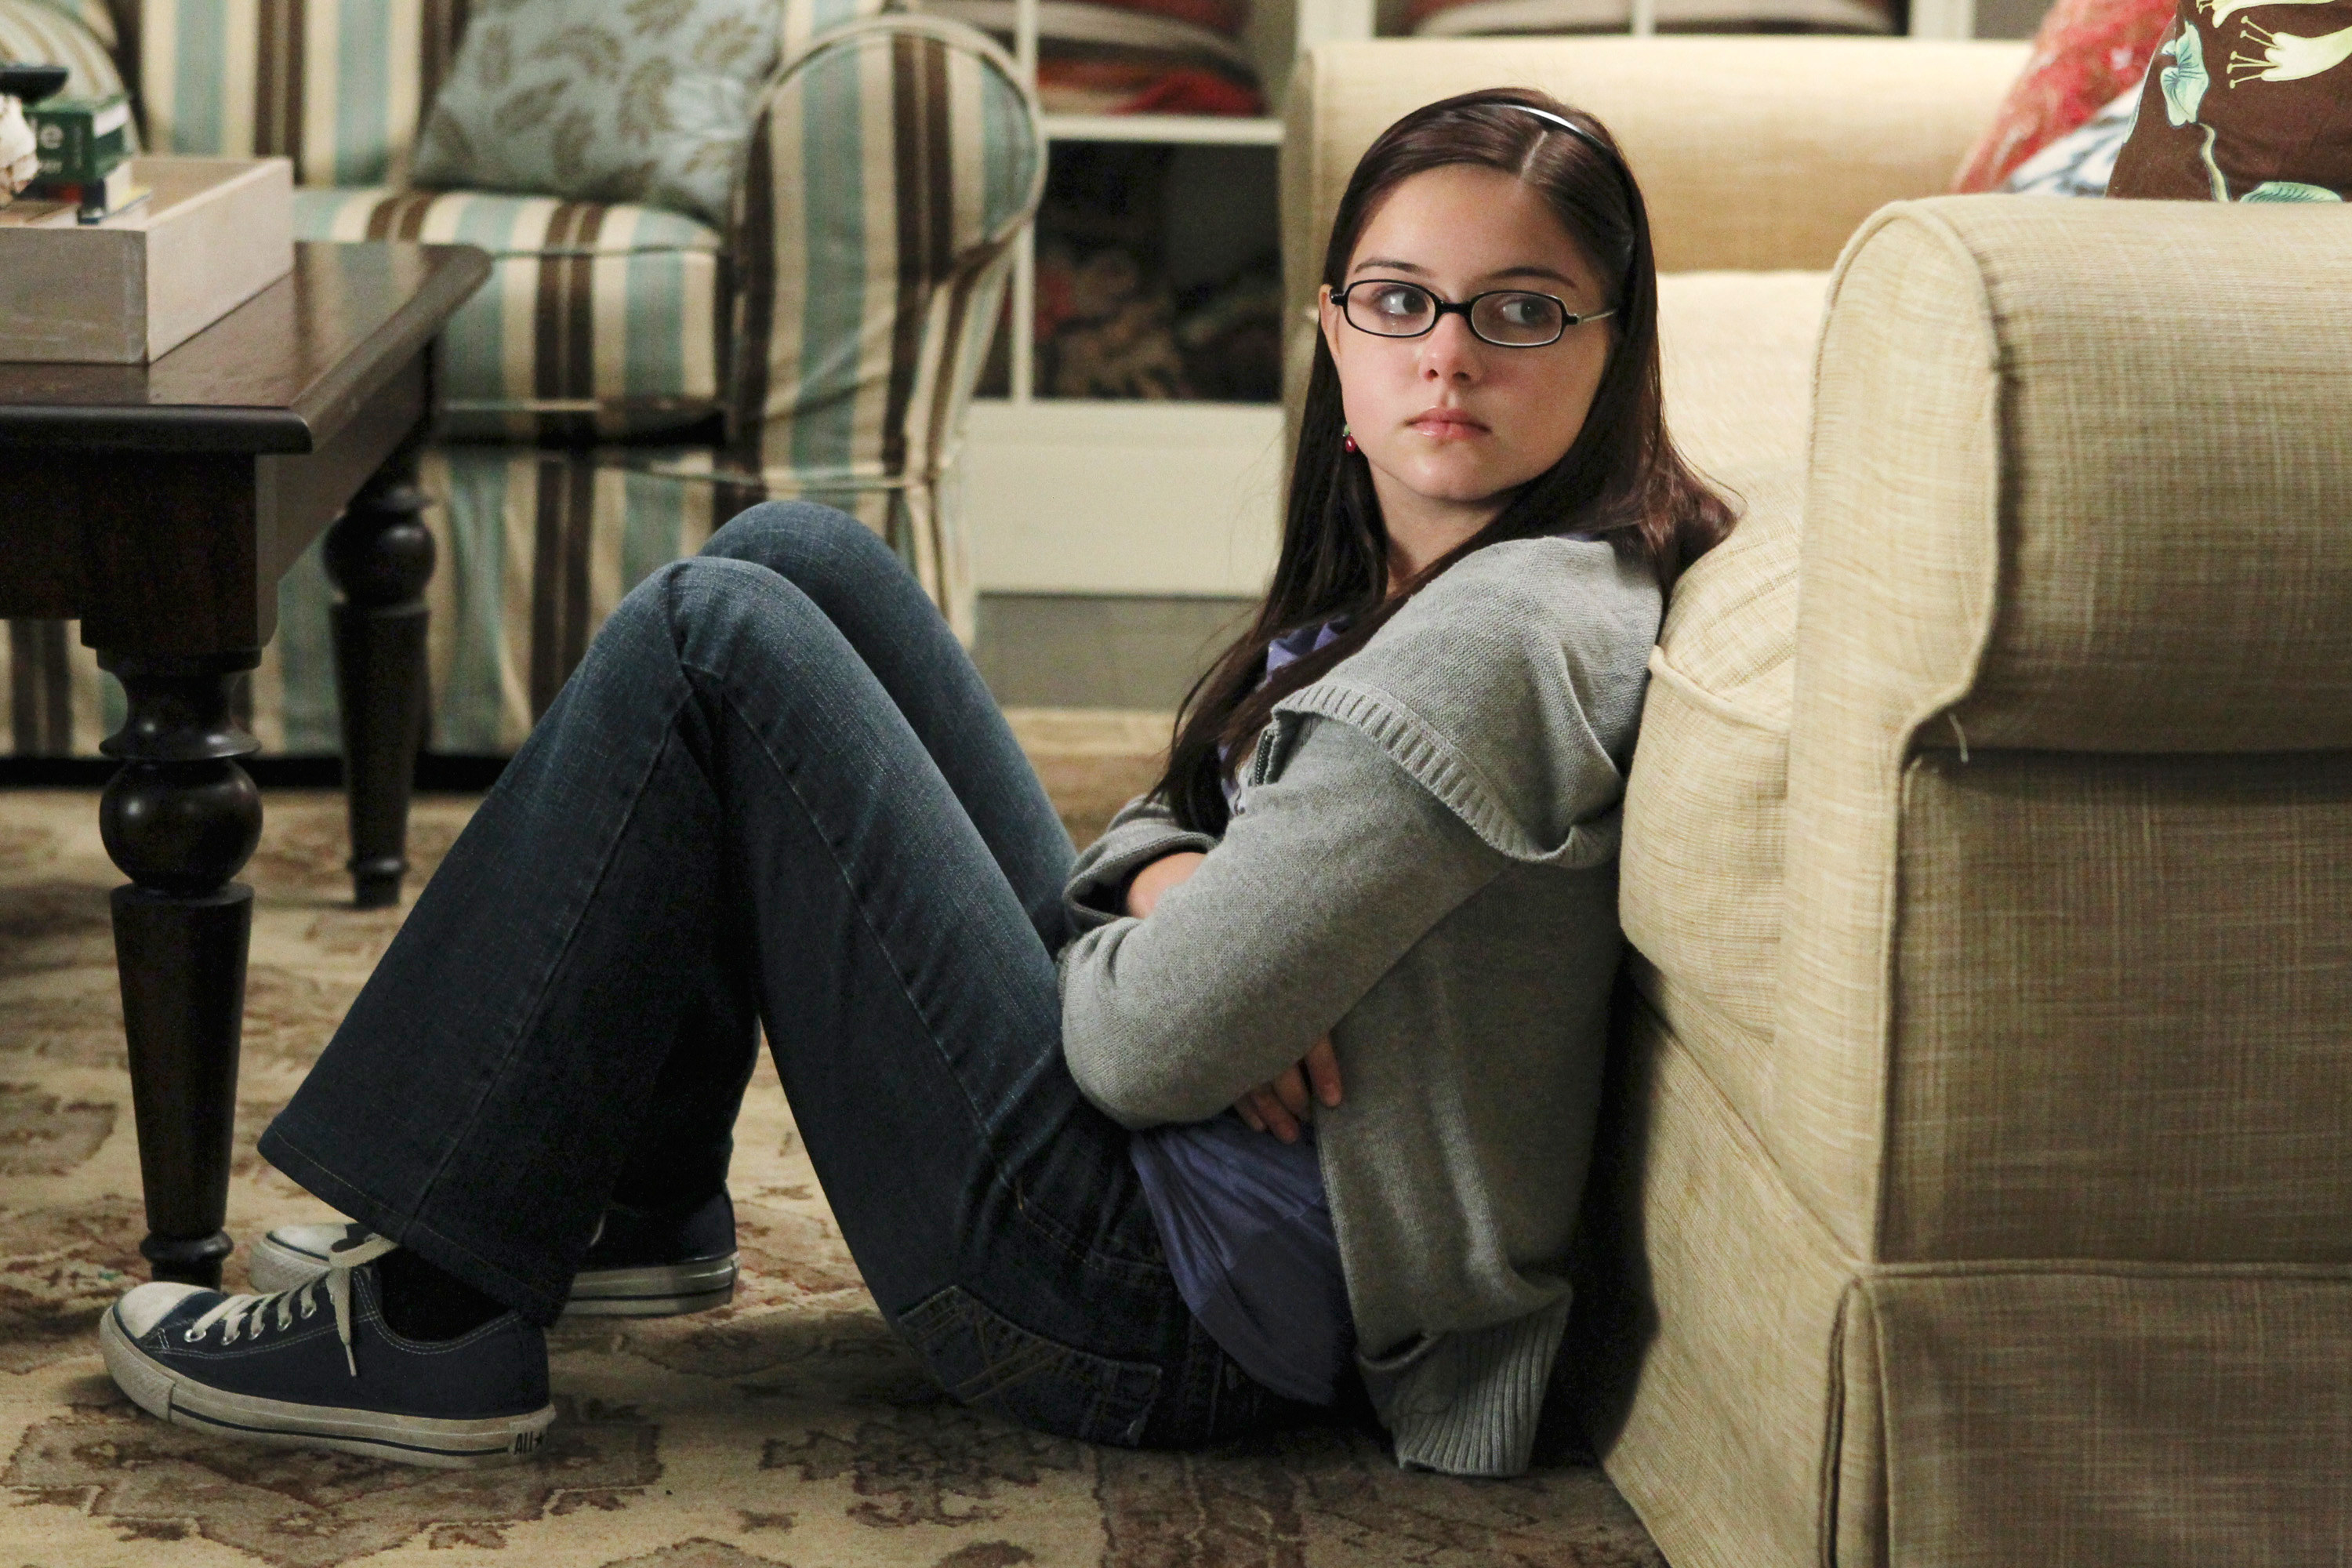 Teen girl sitting on floor in Converse, leaning against couch and looking moody